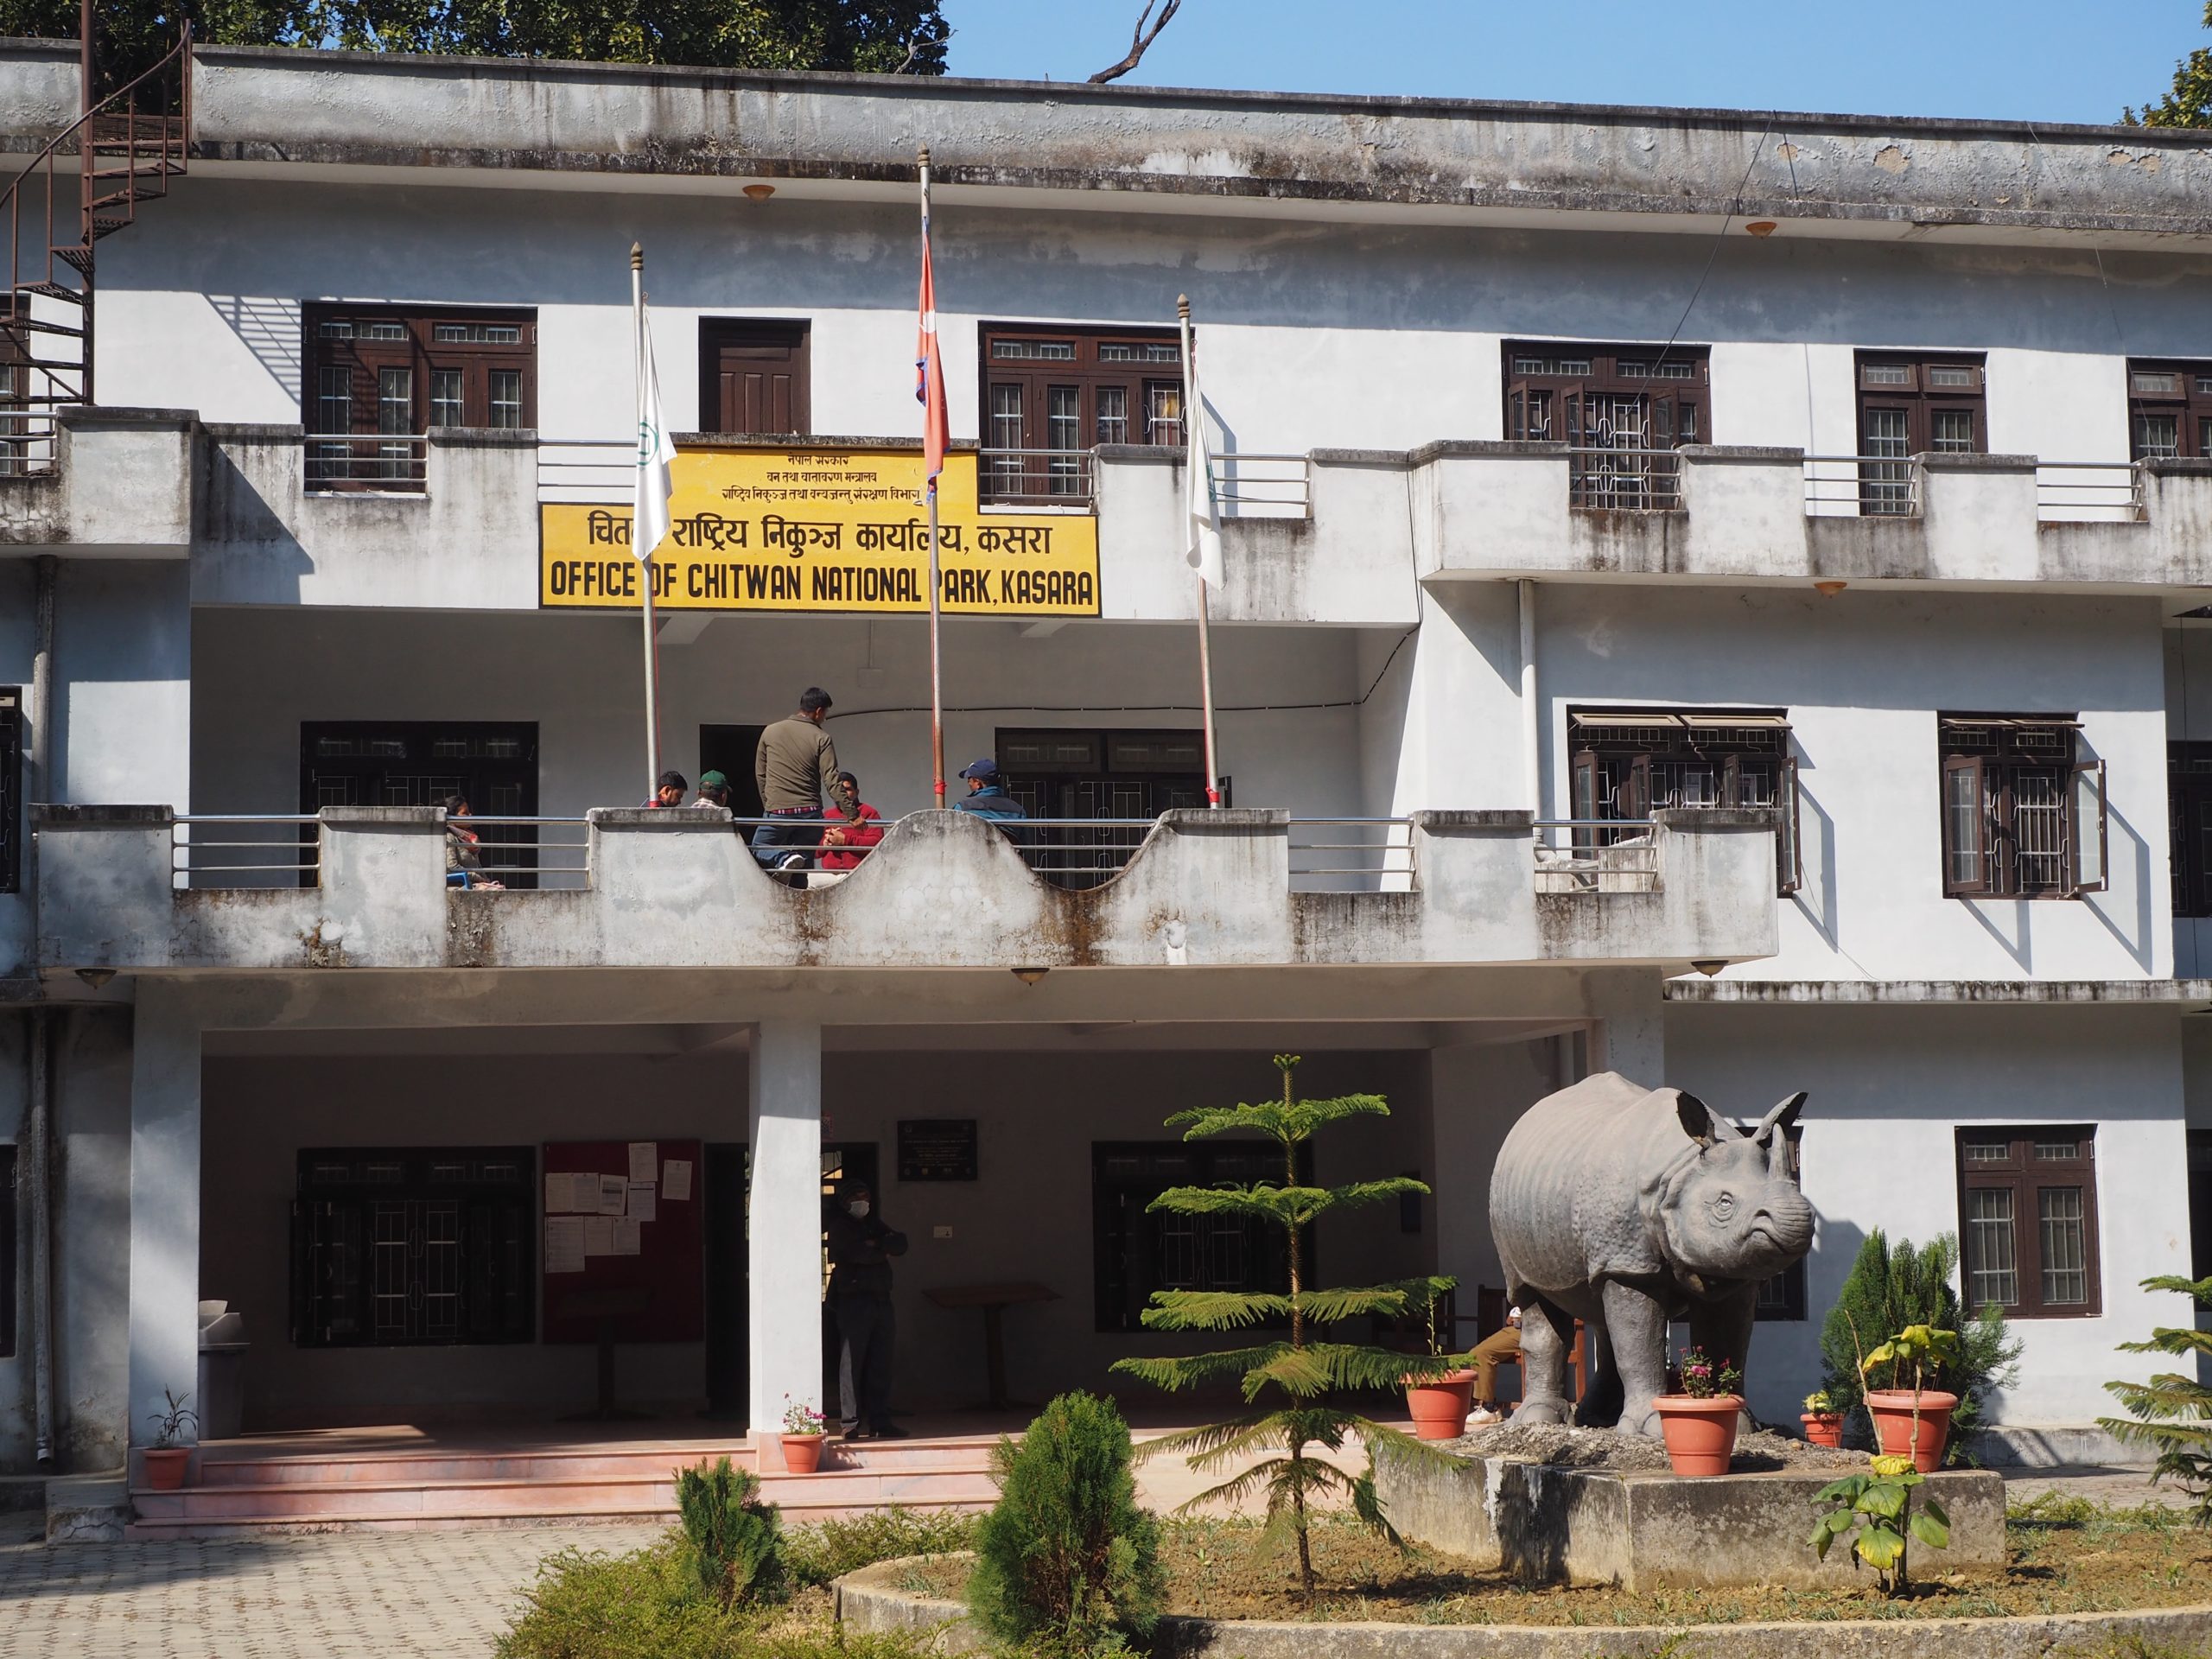 Chitwan National Park headquarters at Kasara, where the chief warden’s office is located (Image: Peter Gill)